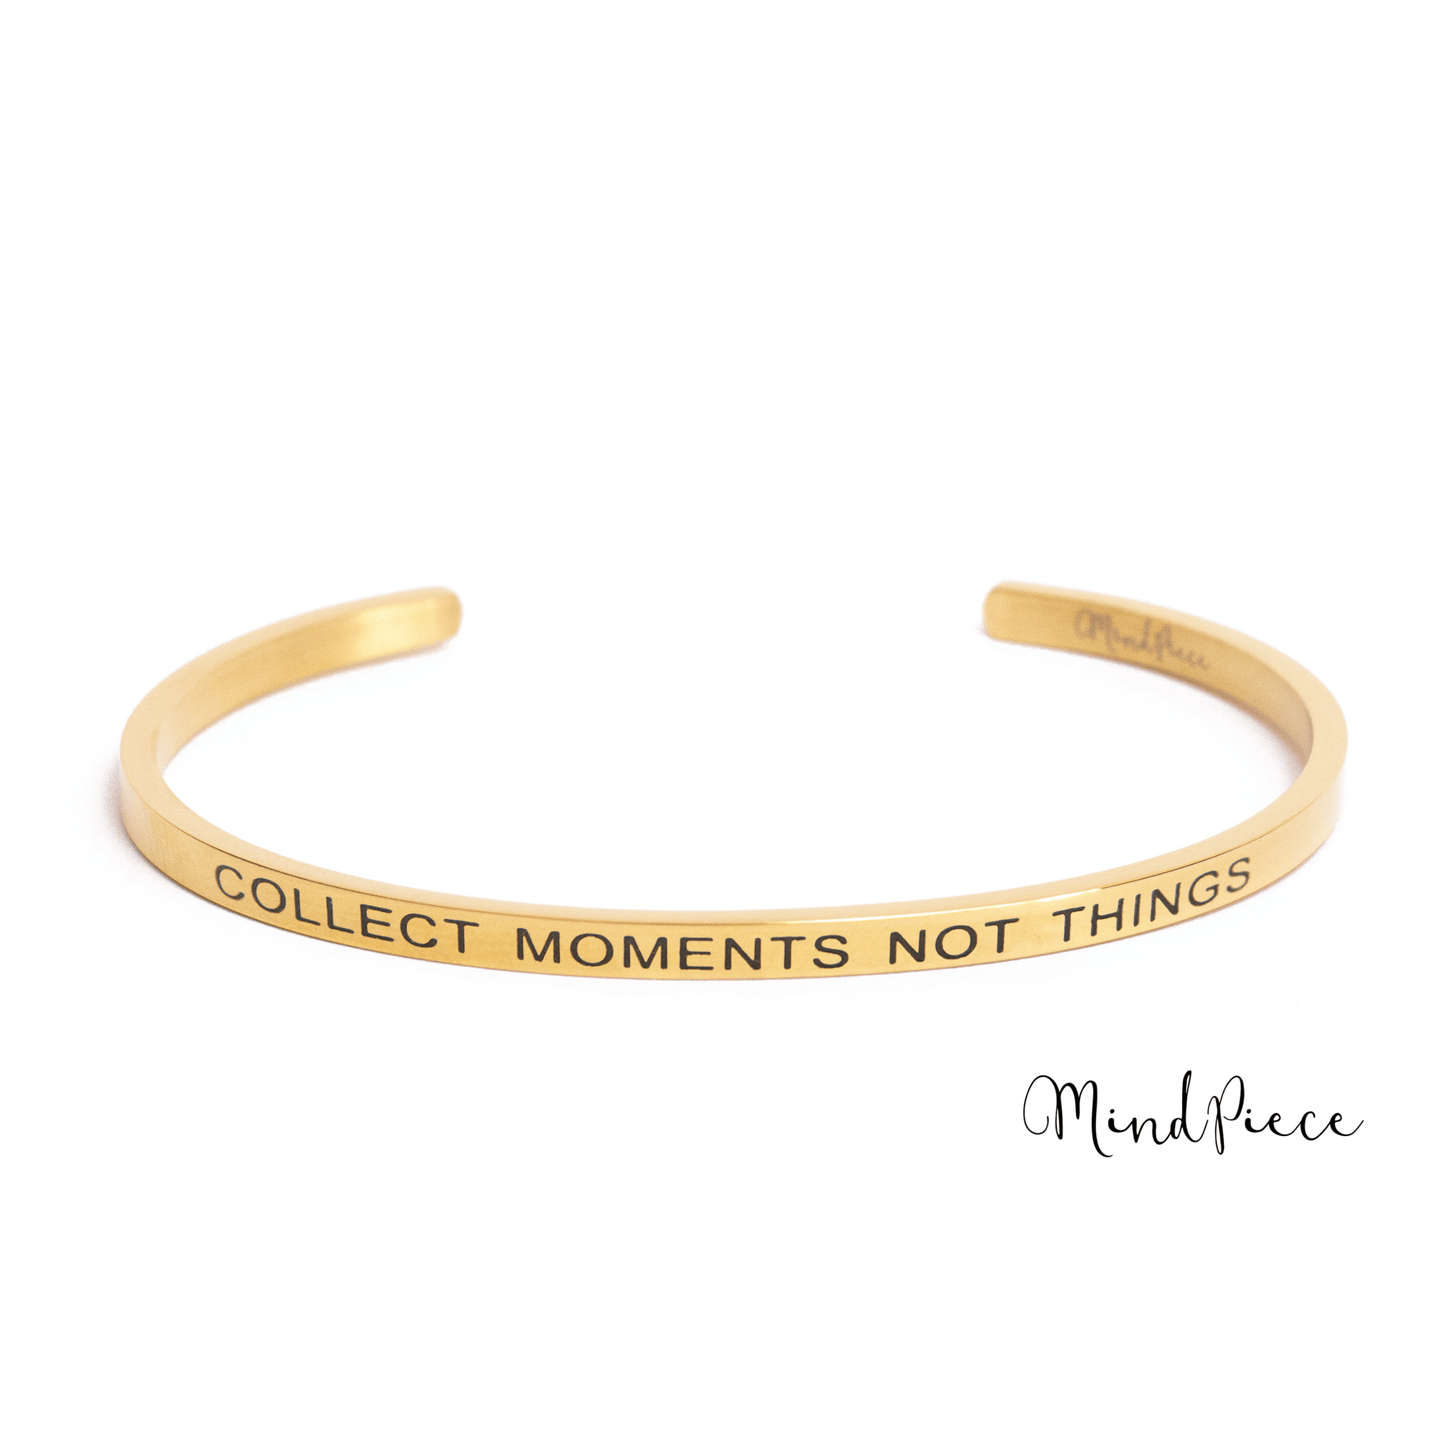 Bracelet quote | collect moments not things (1 pcs) - silver